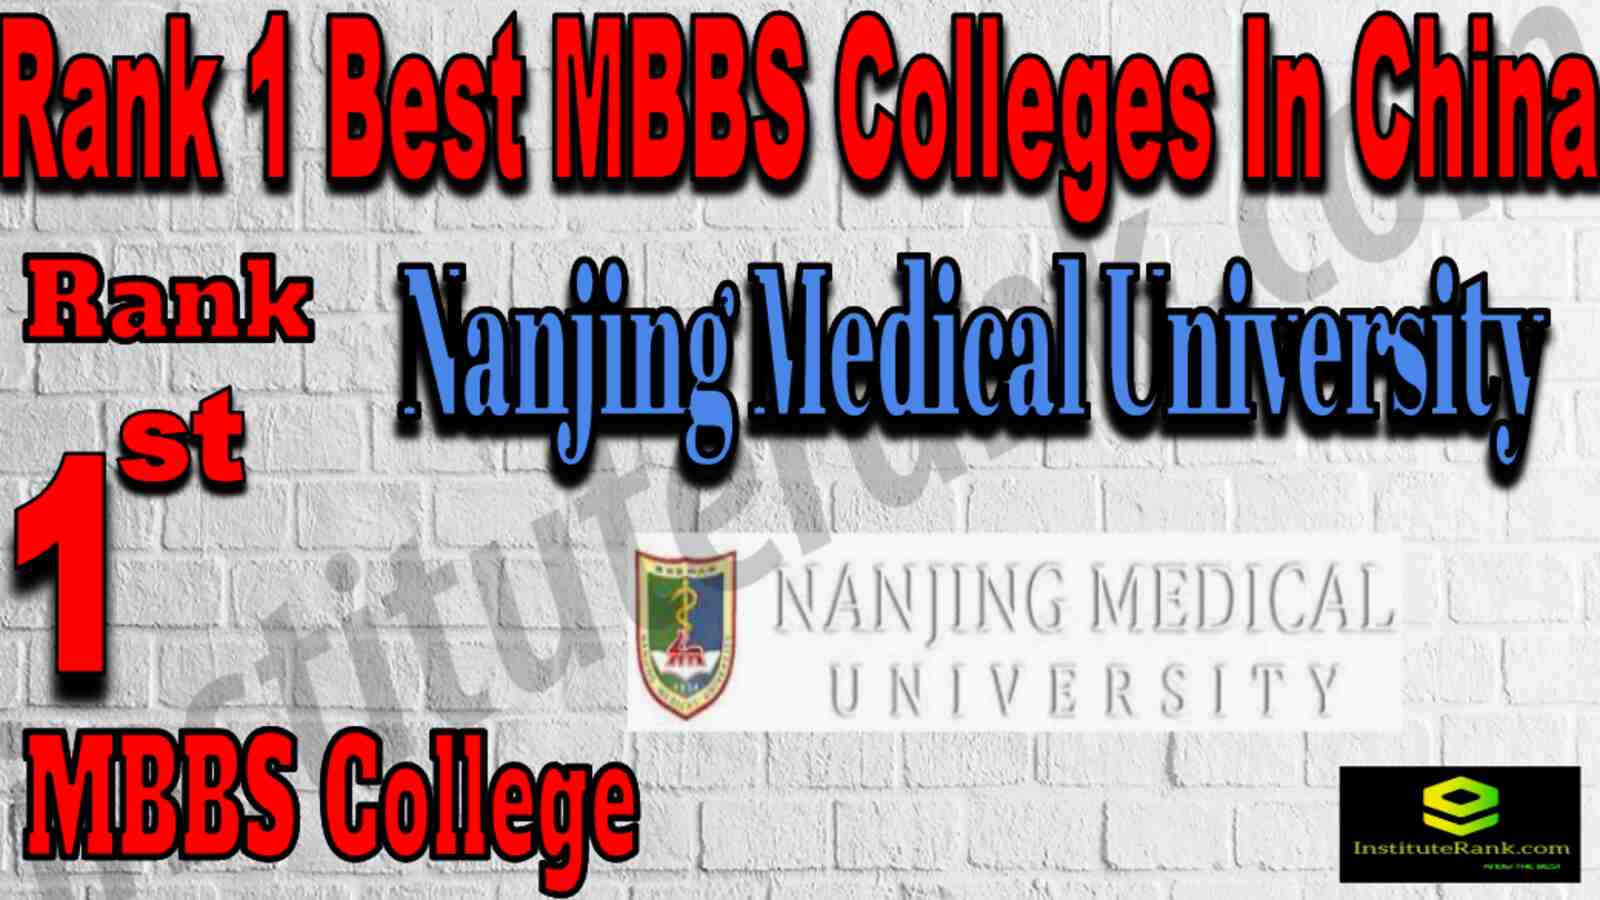 Rank 1 Best MBBS Colleges In China